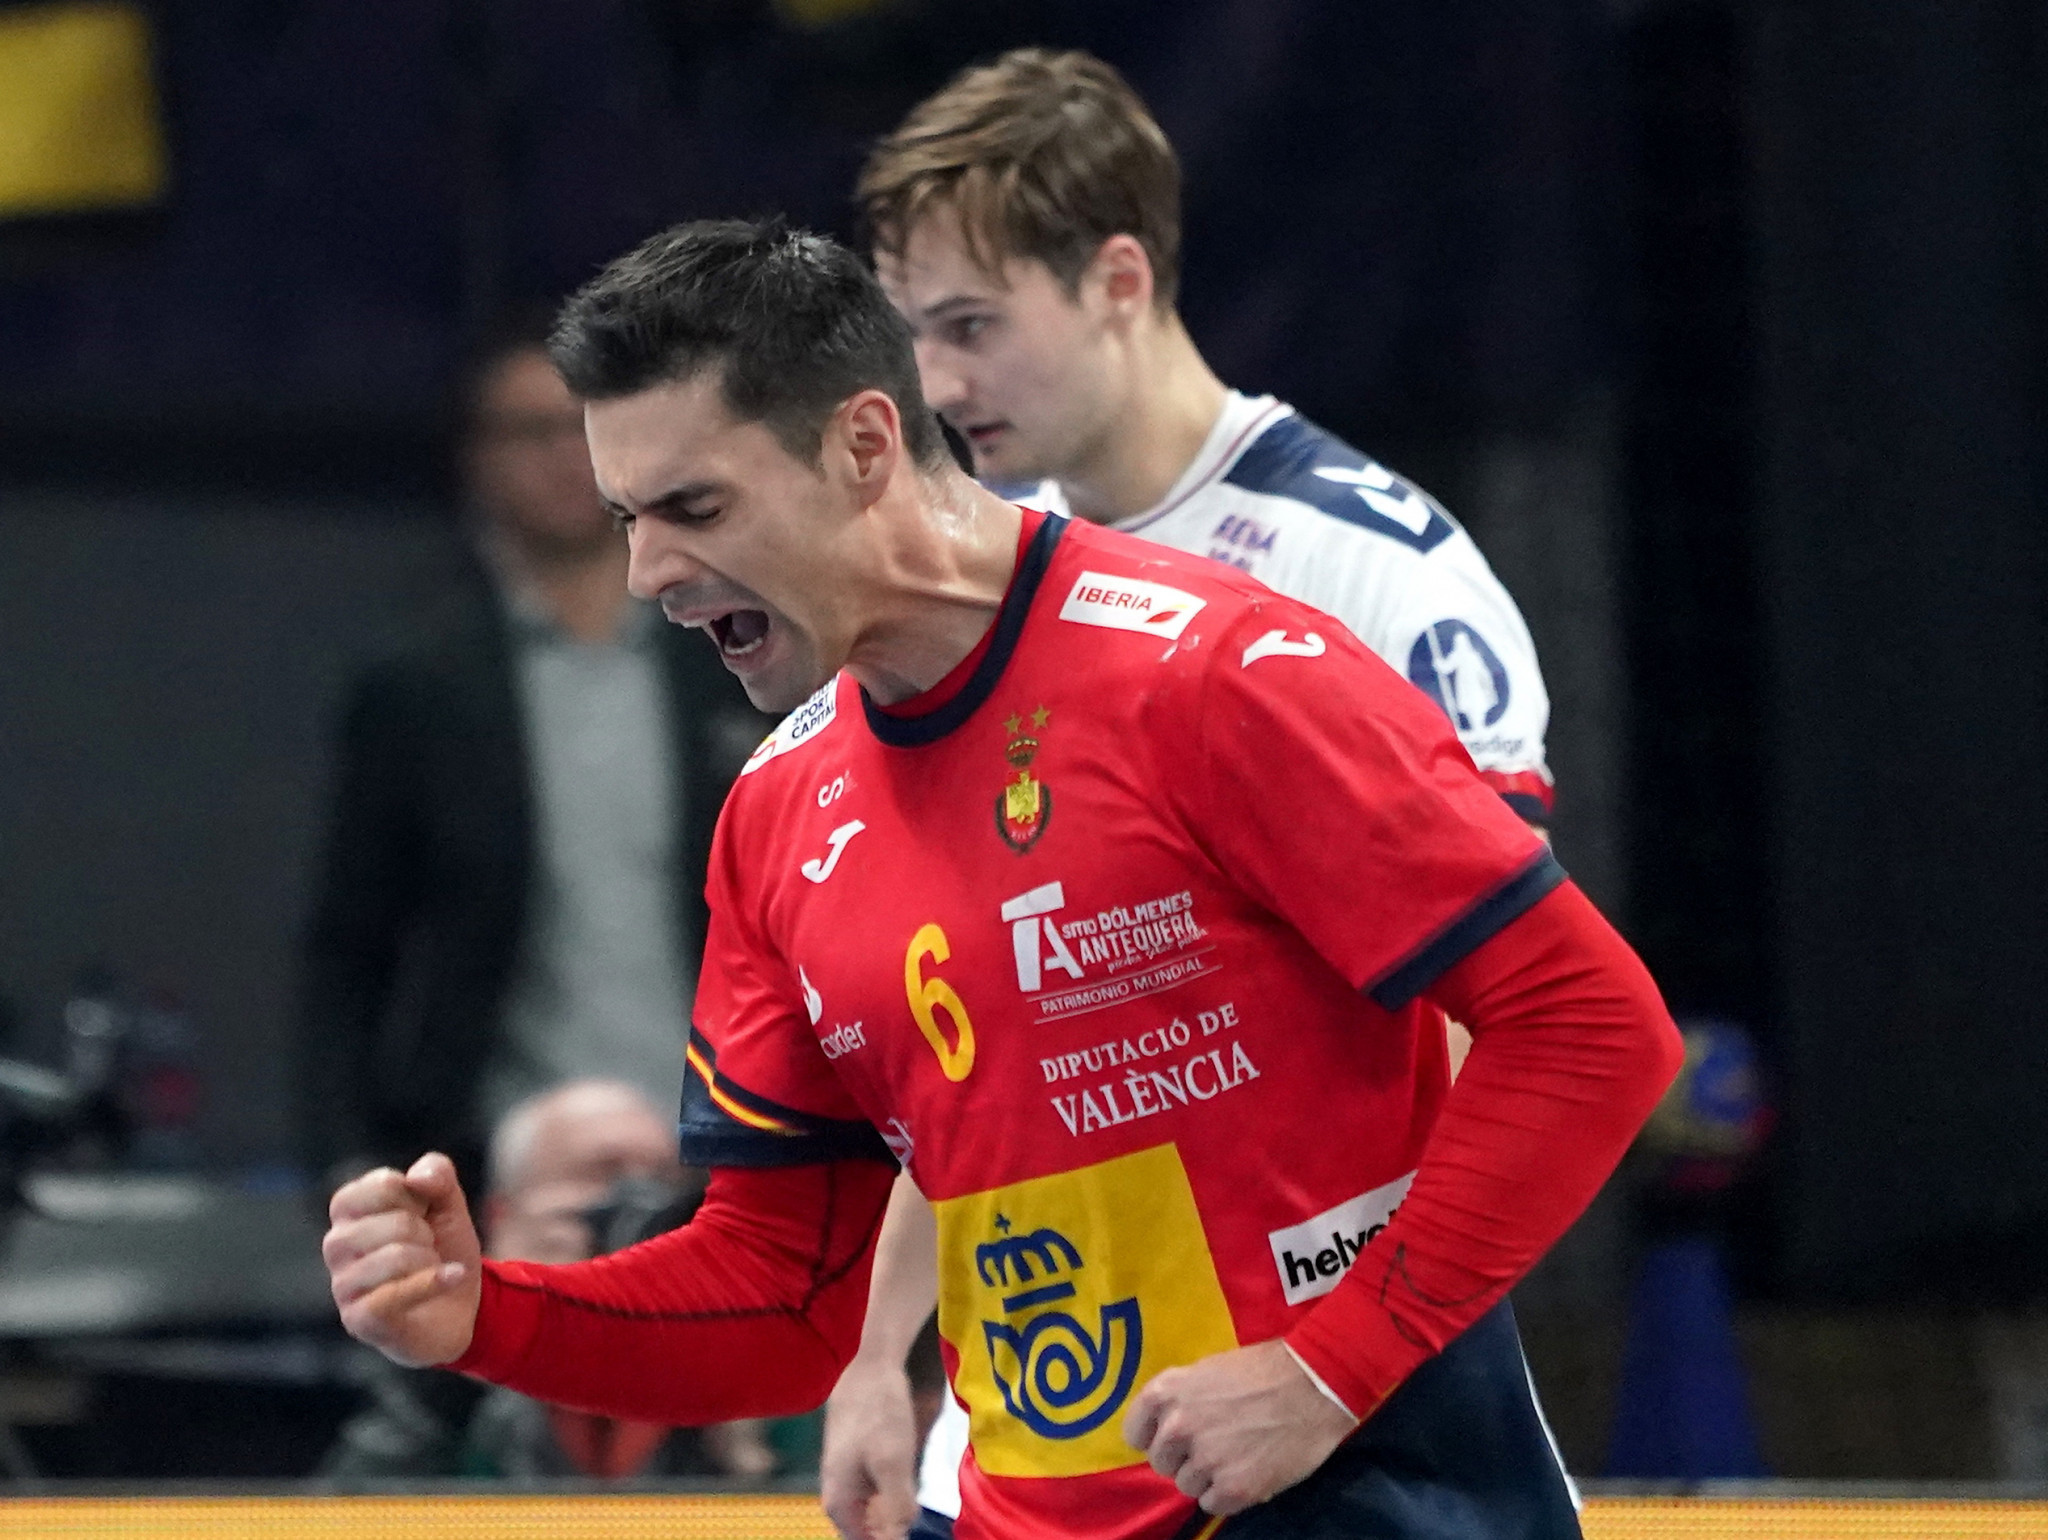 Sweden, France, Spain and Denmark reach last-four of IHF World Championship 